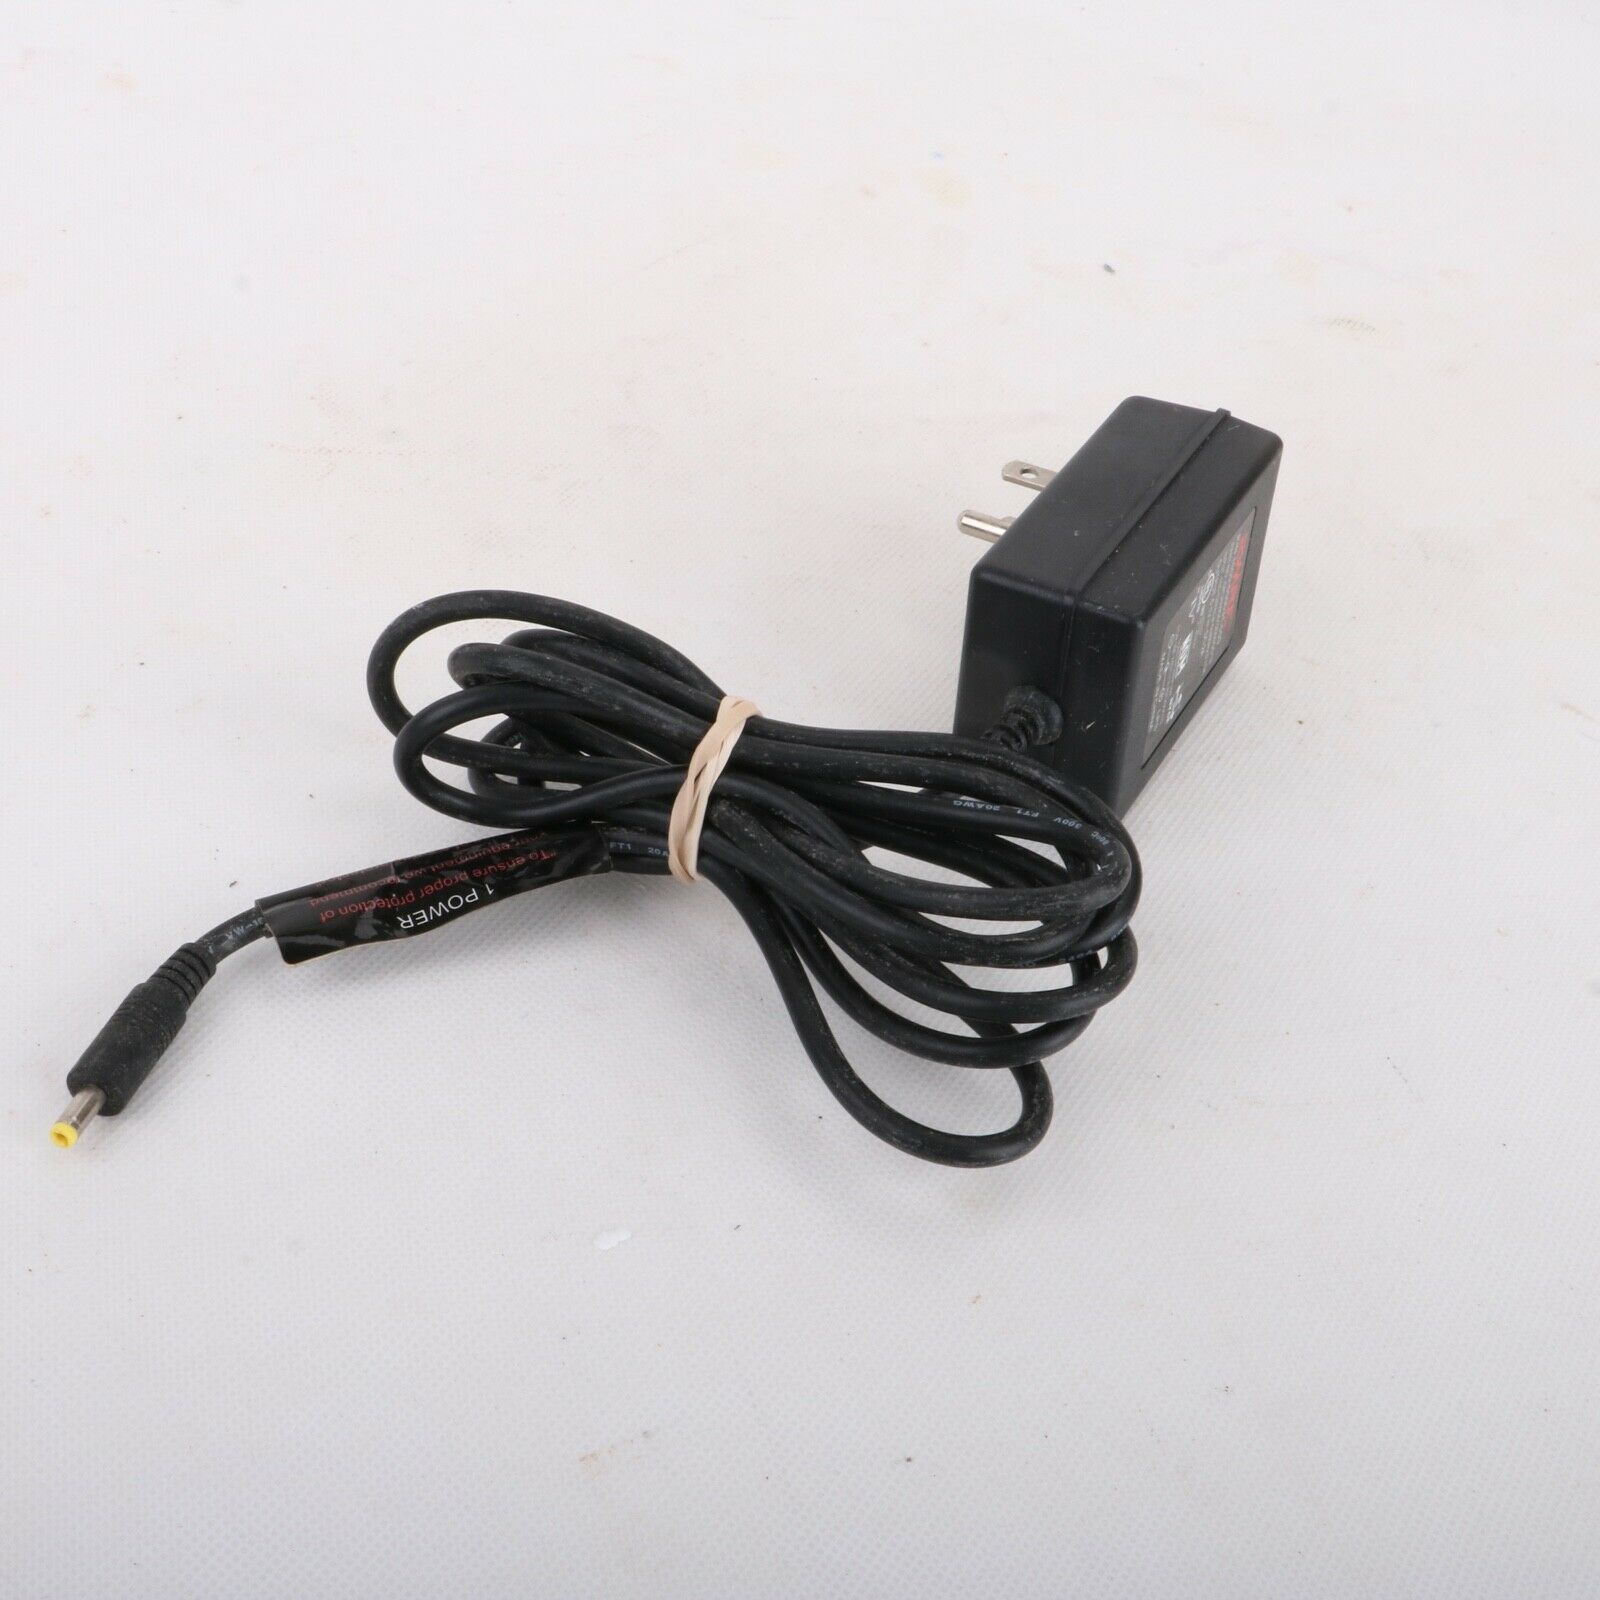 Genuine 2-Wire Modem Power Supply Switching Adapter Plug 5.1V 2A 1000-500031-000 Country/Region of Manufacture: Chin - Click Image to Close